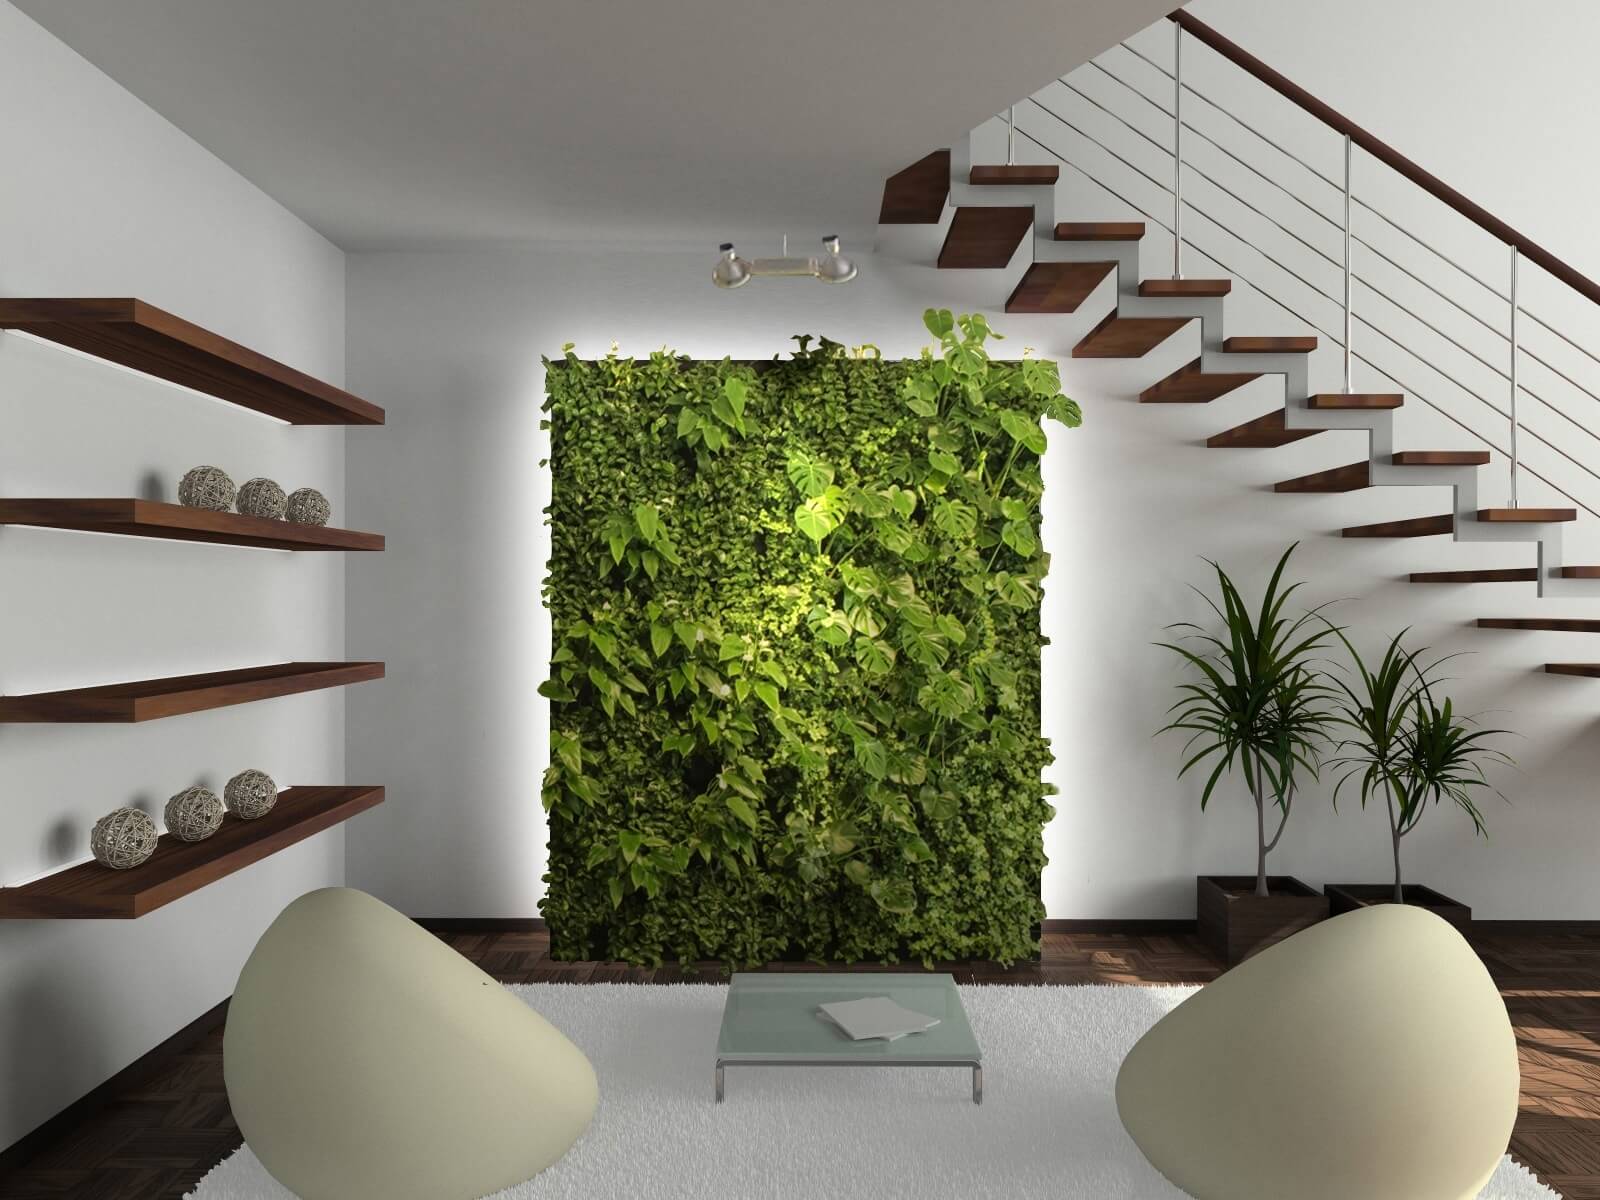 Can Plants or Greenery Be Used as Part of Stairs Landing Decor?